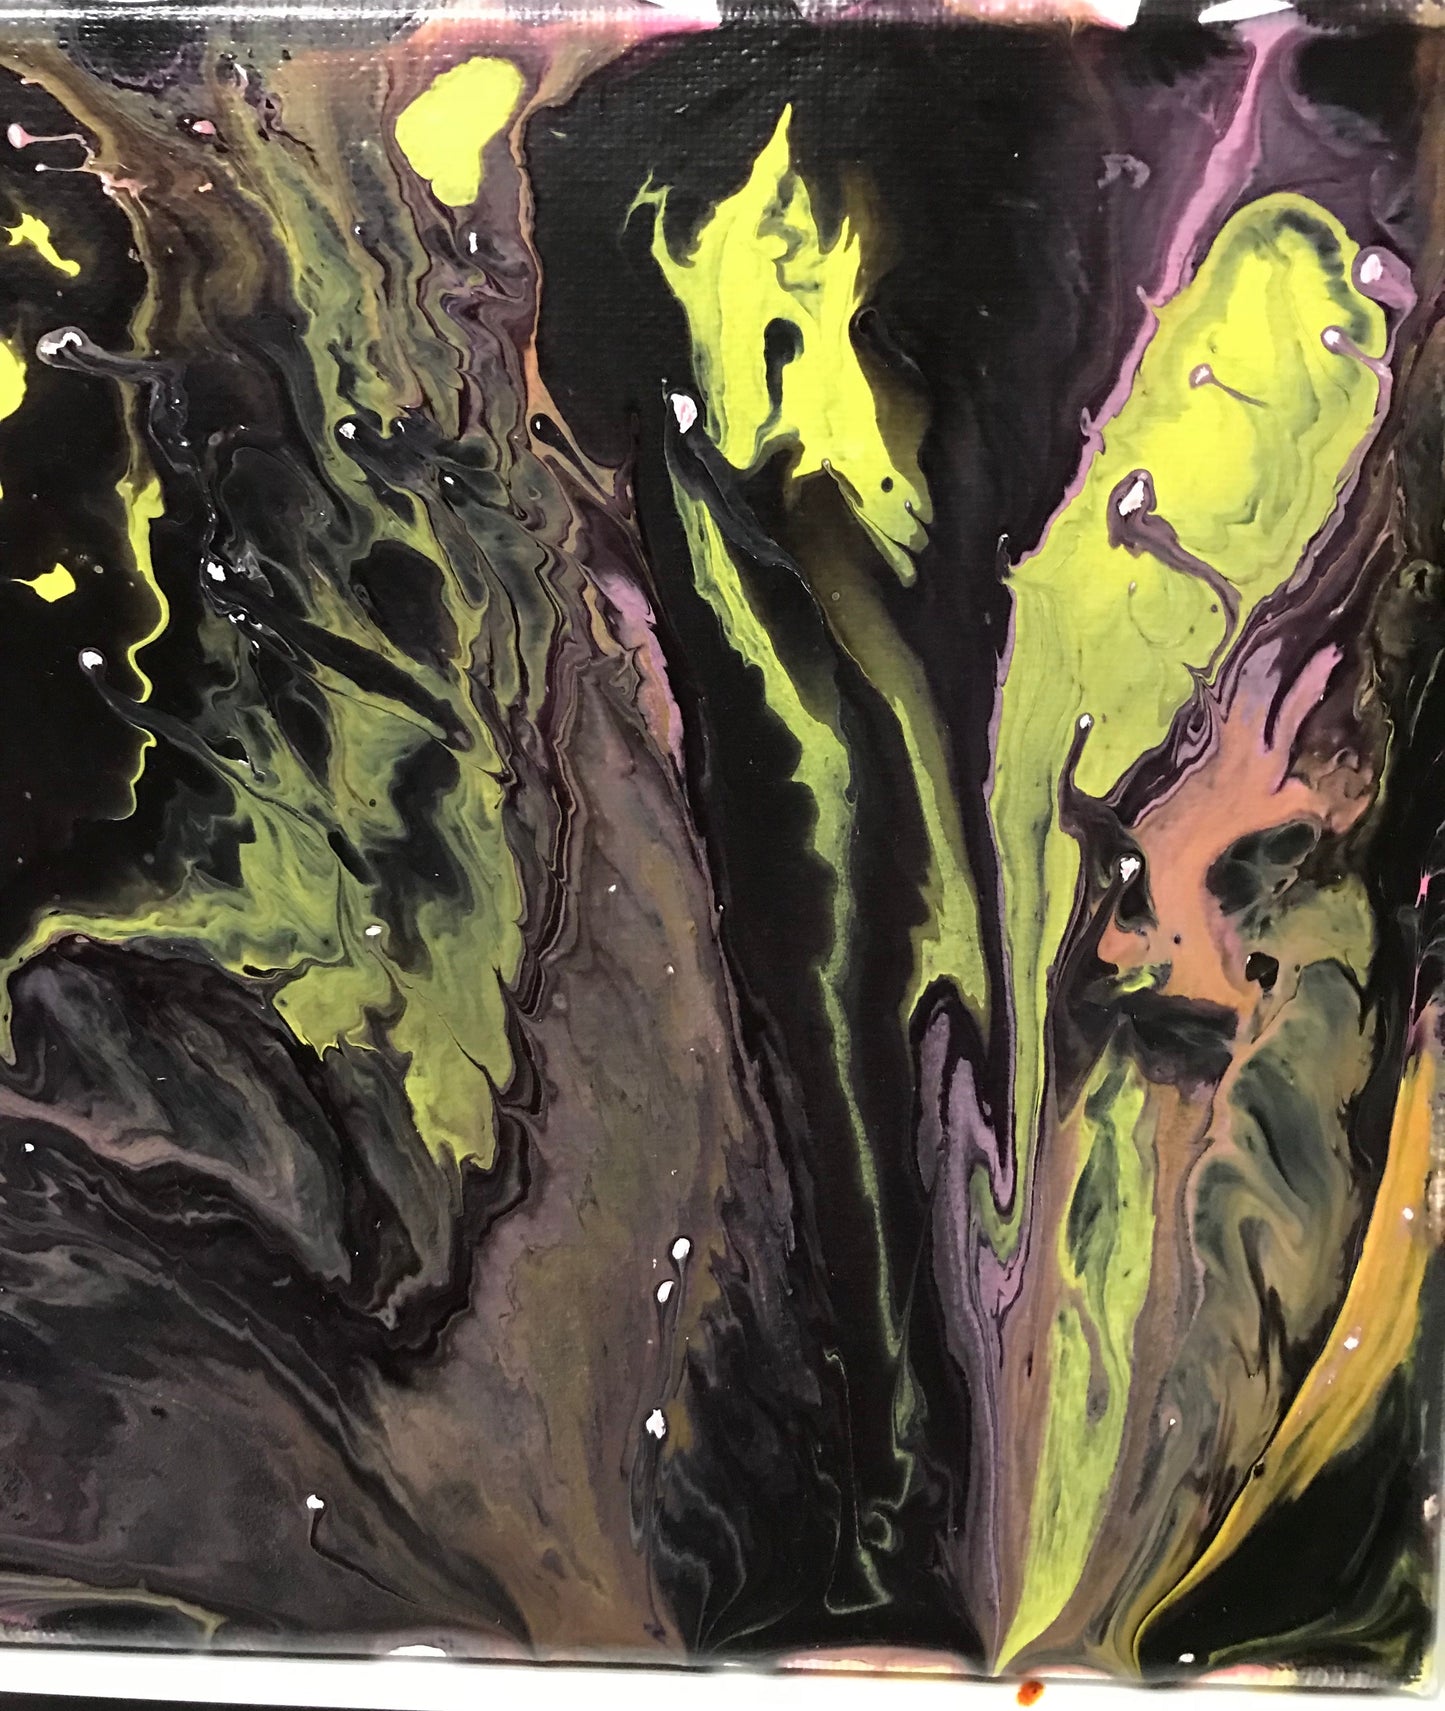 Sun, Feb 13, 1-3p "Acrylic Poured" Private Kids Painting Party